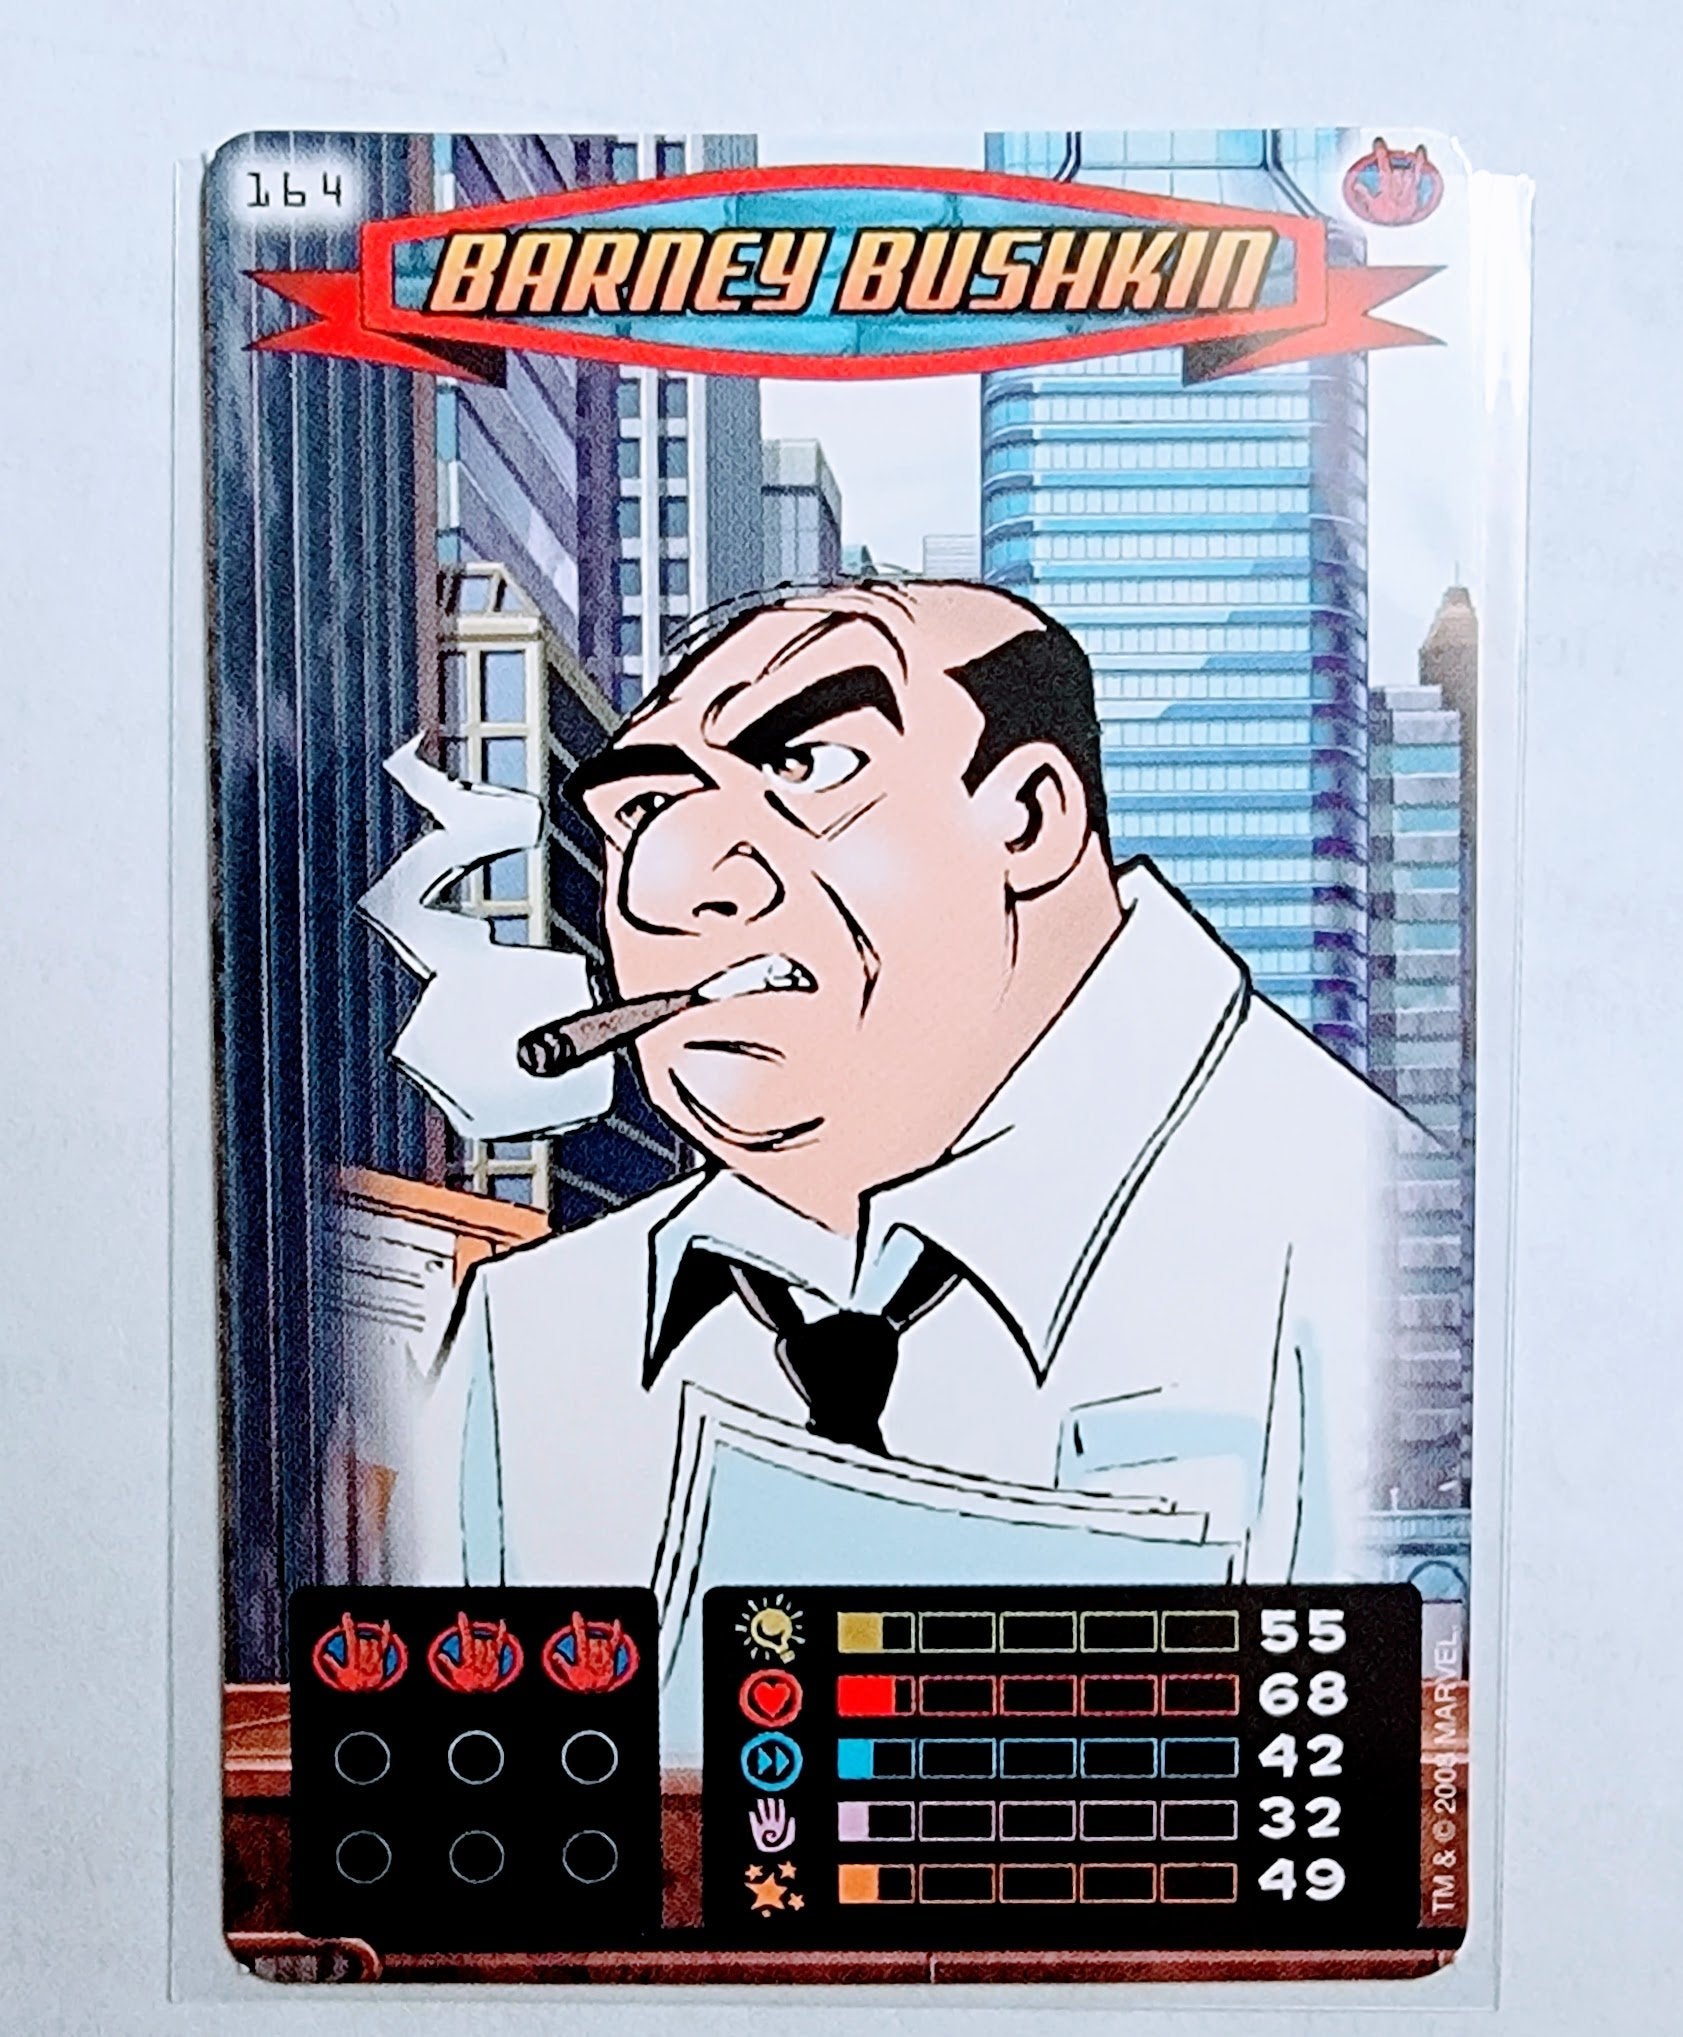 2008 Spiderman Heroes and Villains Barney Bushkin #164 Marvel Booster Trading Card UPTI simple Xclusive Collectibles   